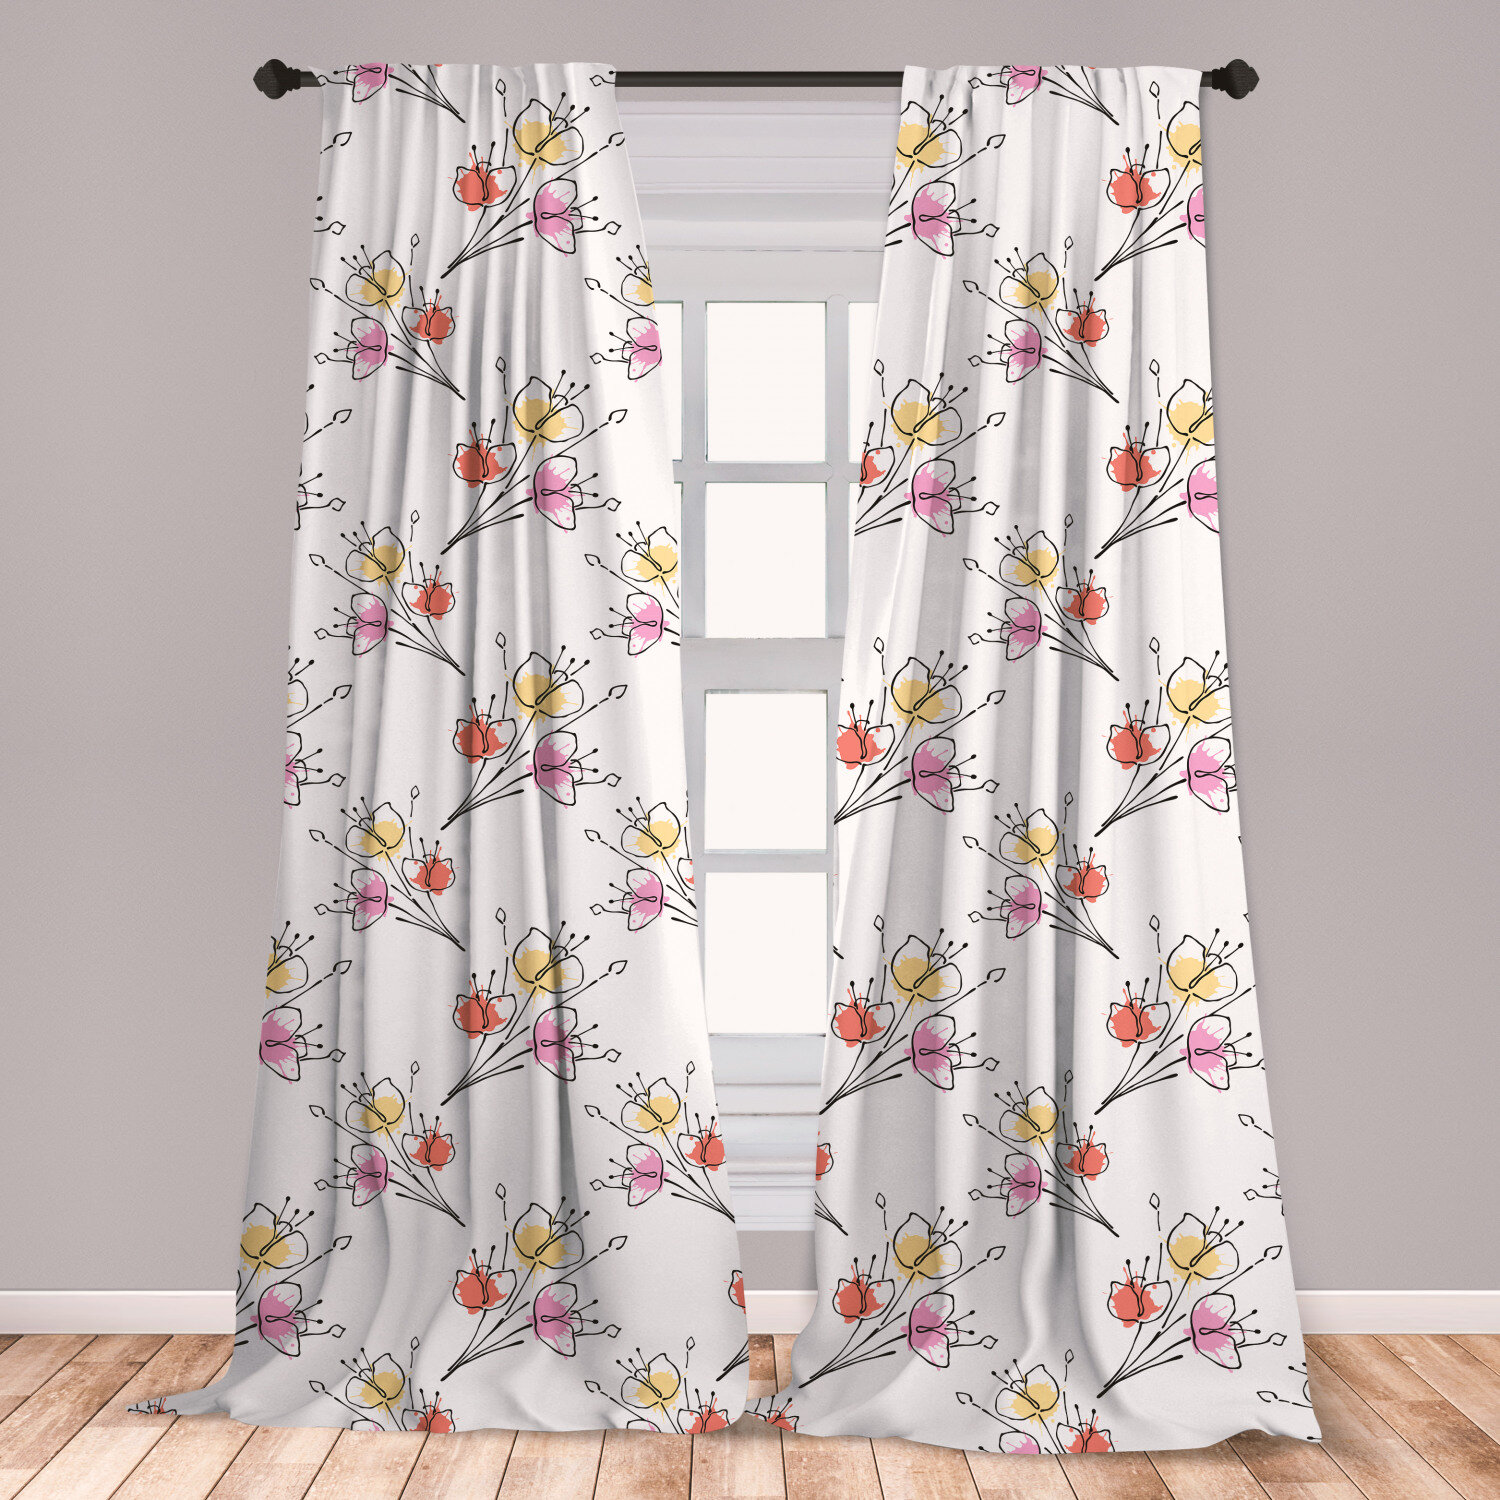 East Urban Home Ambesonne Floral Curtains